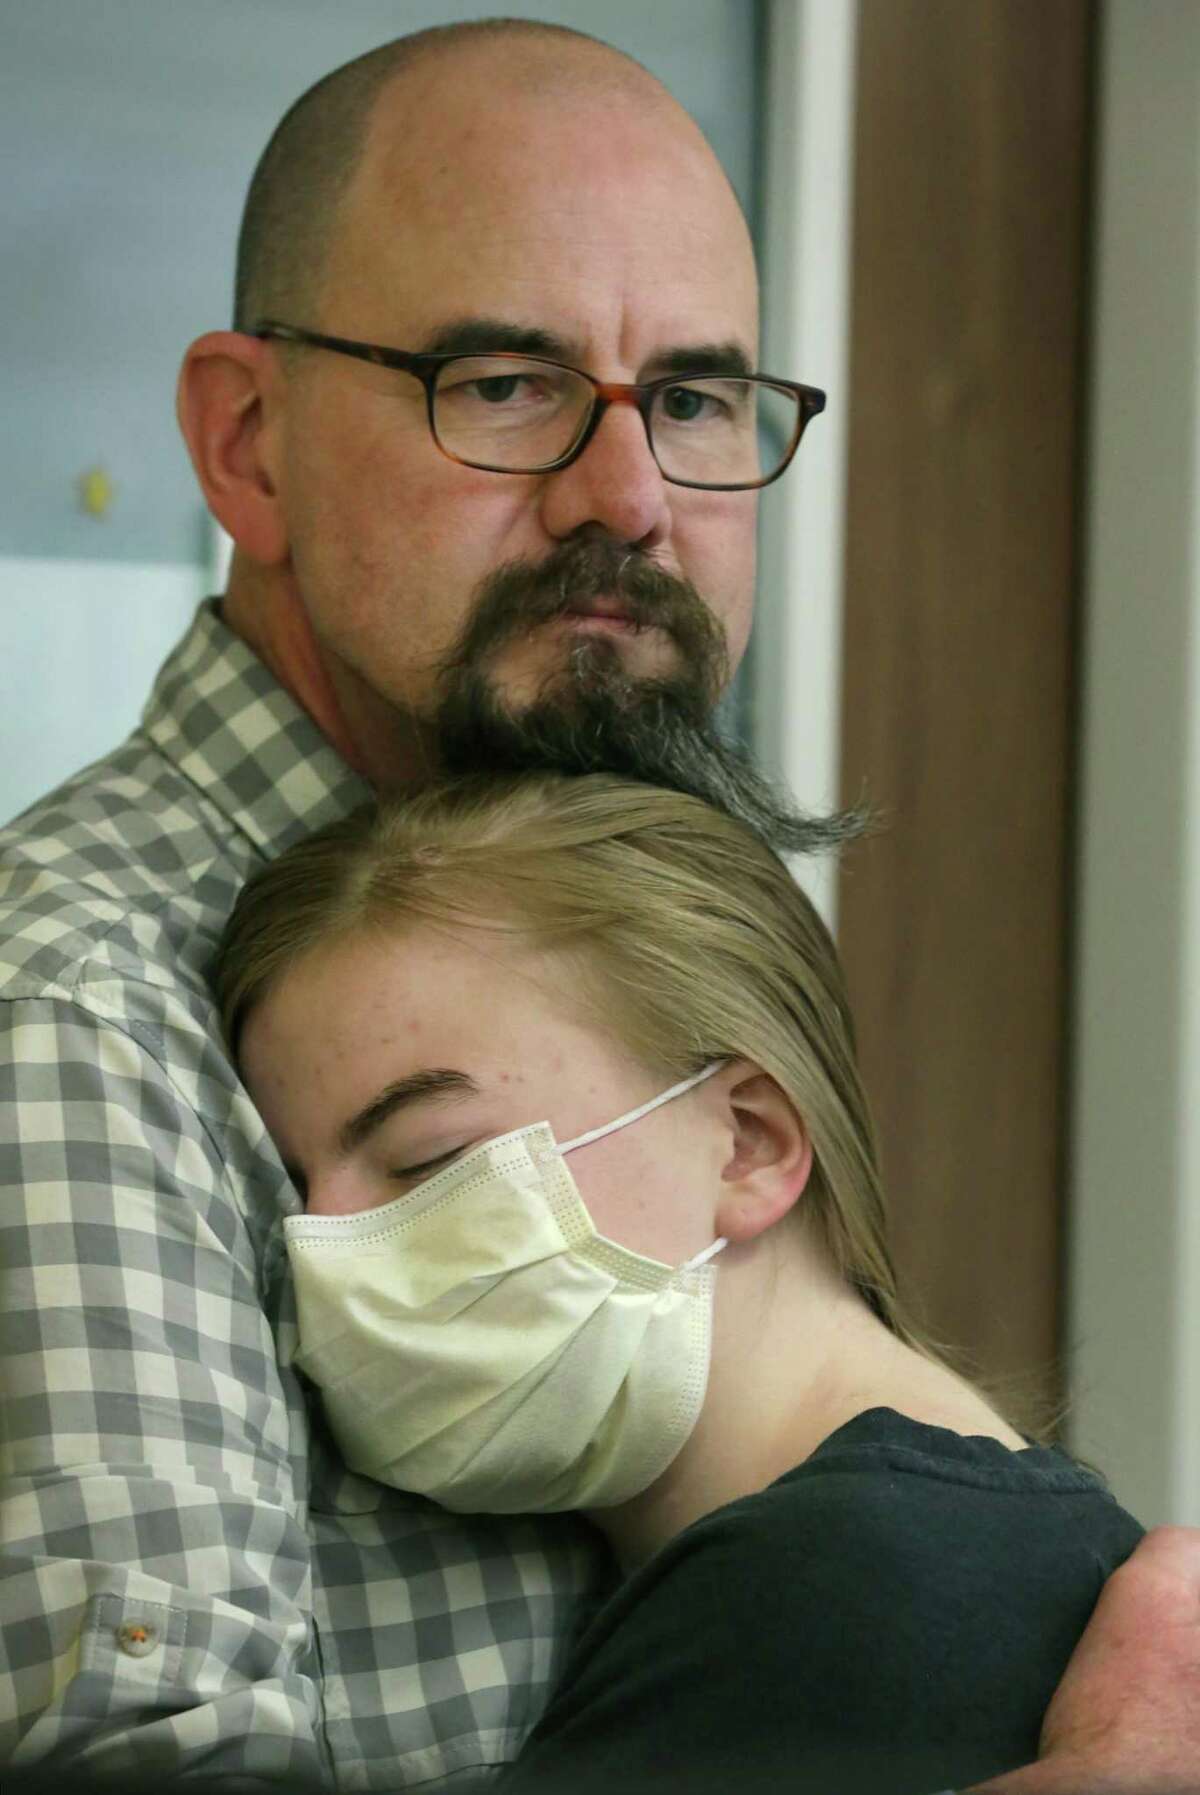 Ava Shepperd, 14, rests her head on the shoulder of her father, John Shepperd, during interviews May 6, 2019, at the University Transplant Center, where she and her brother John Ben Shepperd, who both have a genetic disorder that compromised their kidneys, were recipients of kidneys from one donor. The transplants took place May 3.